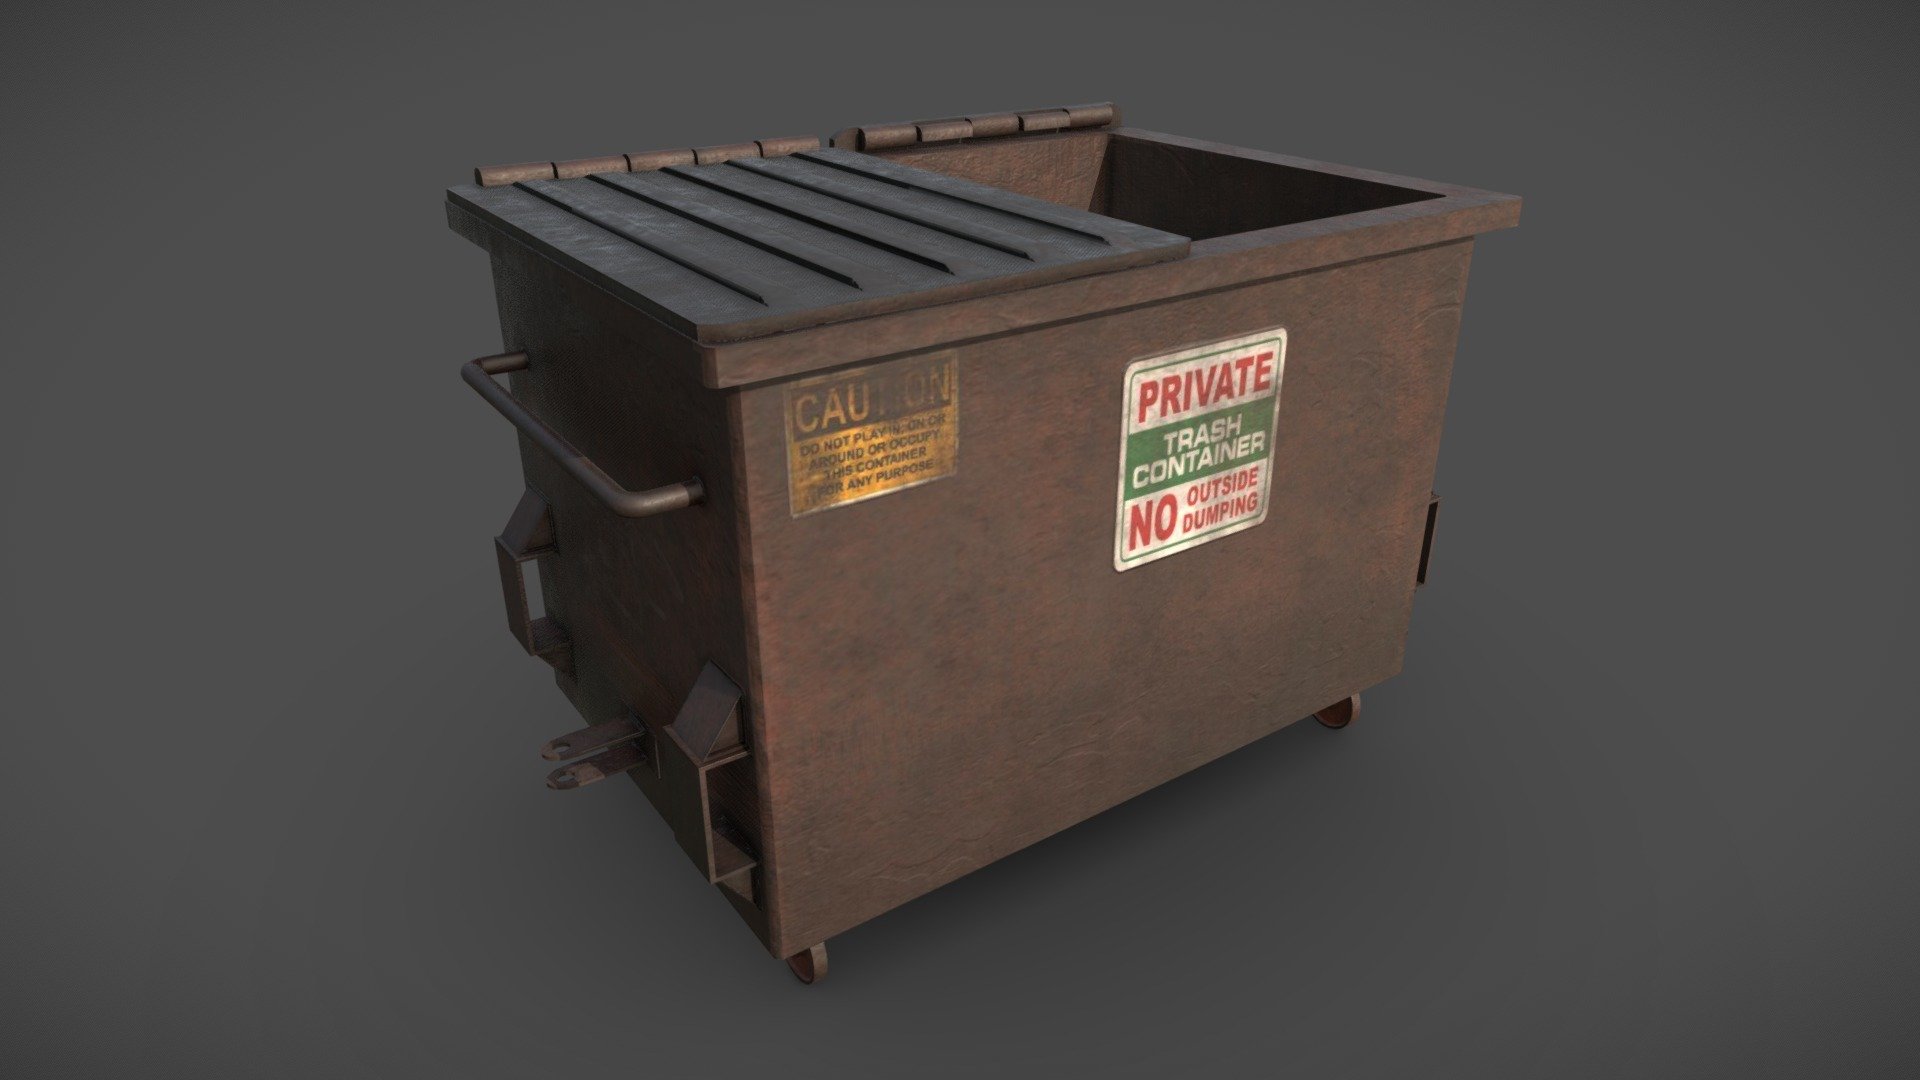 Spent the day working on some nice garbage 3d model